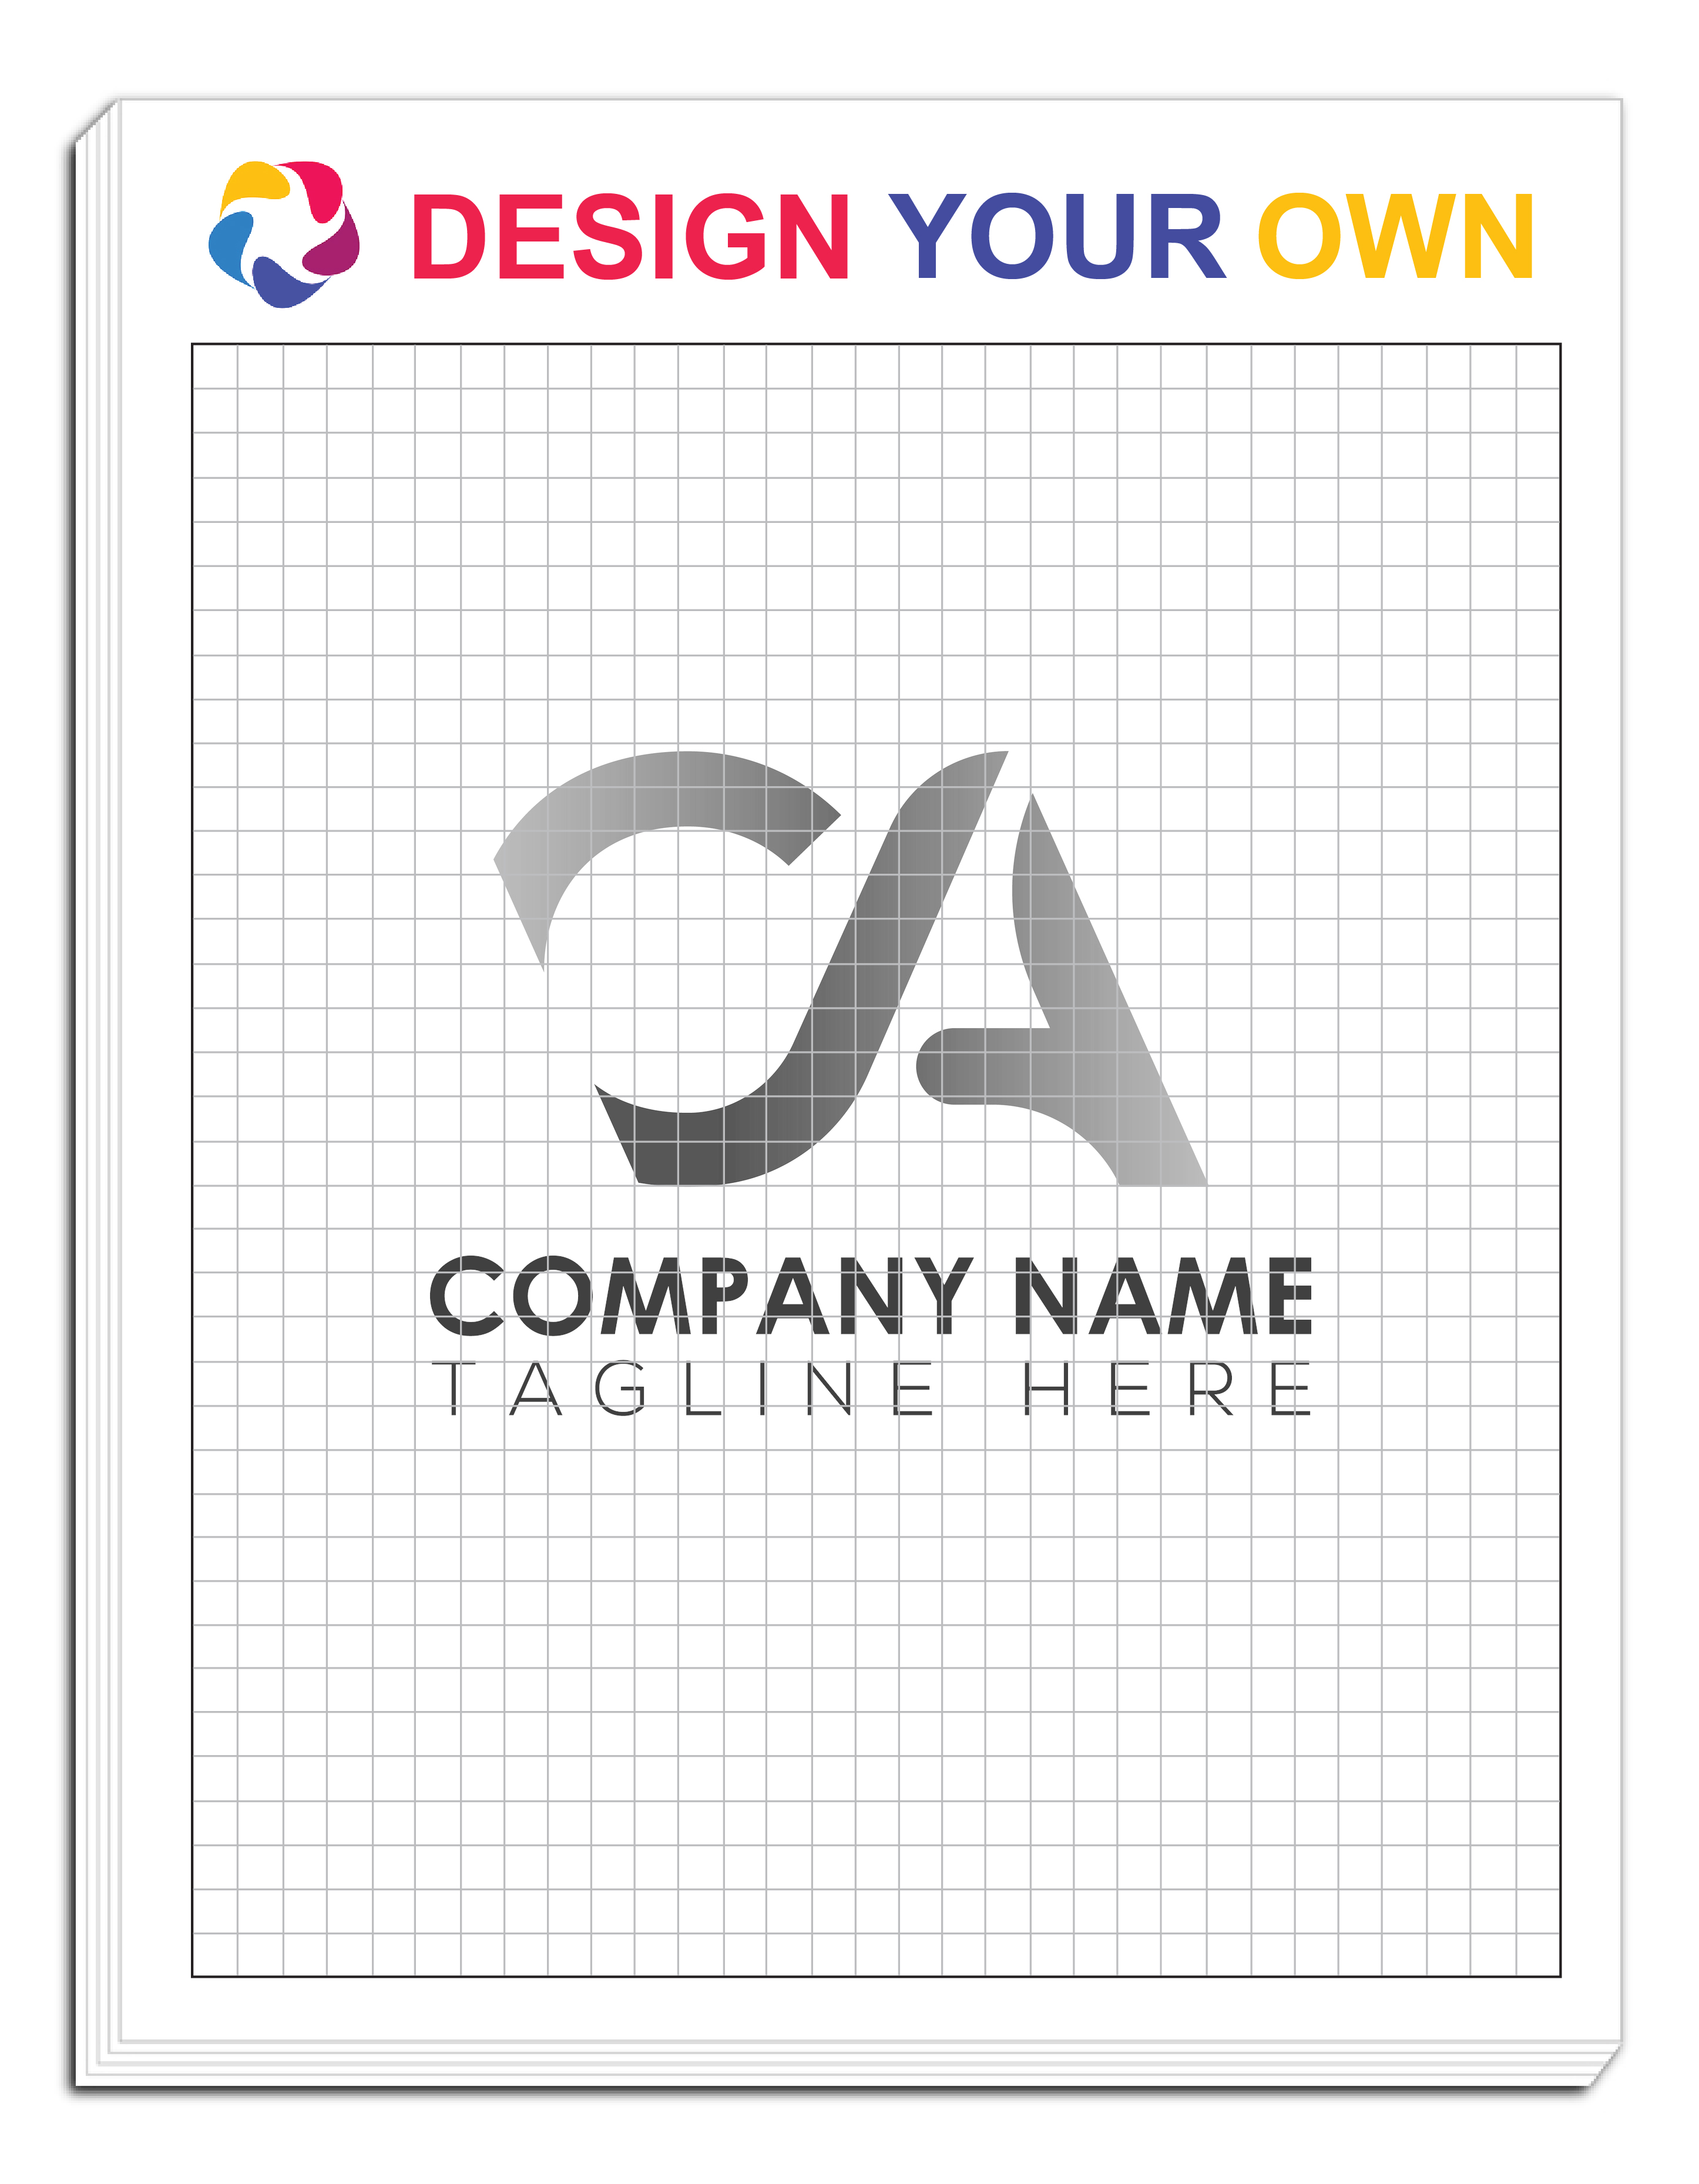 Custom printed graph pads with full color logo